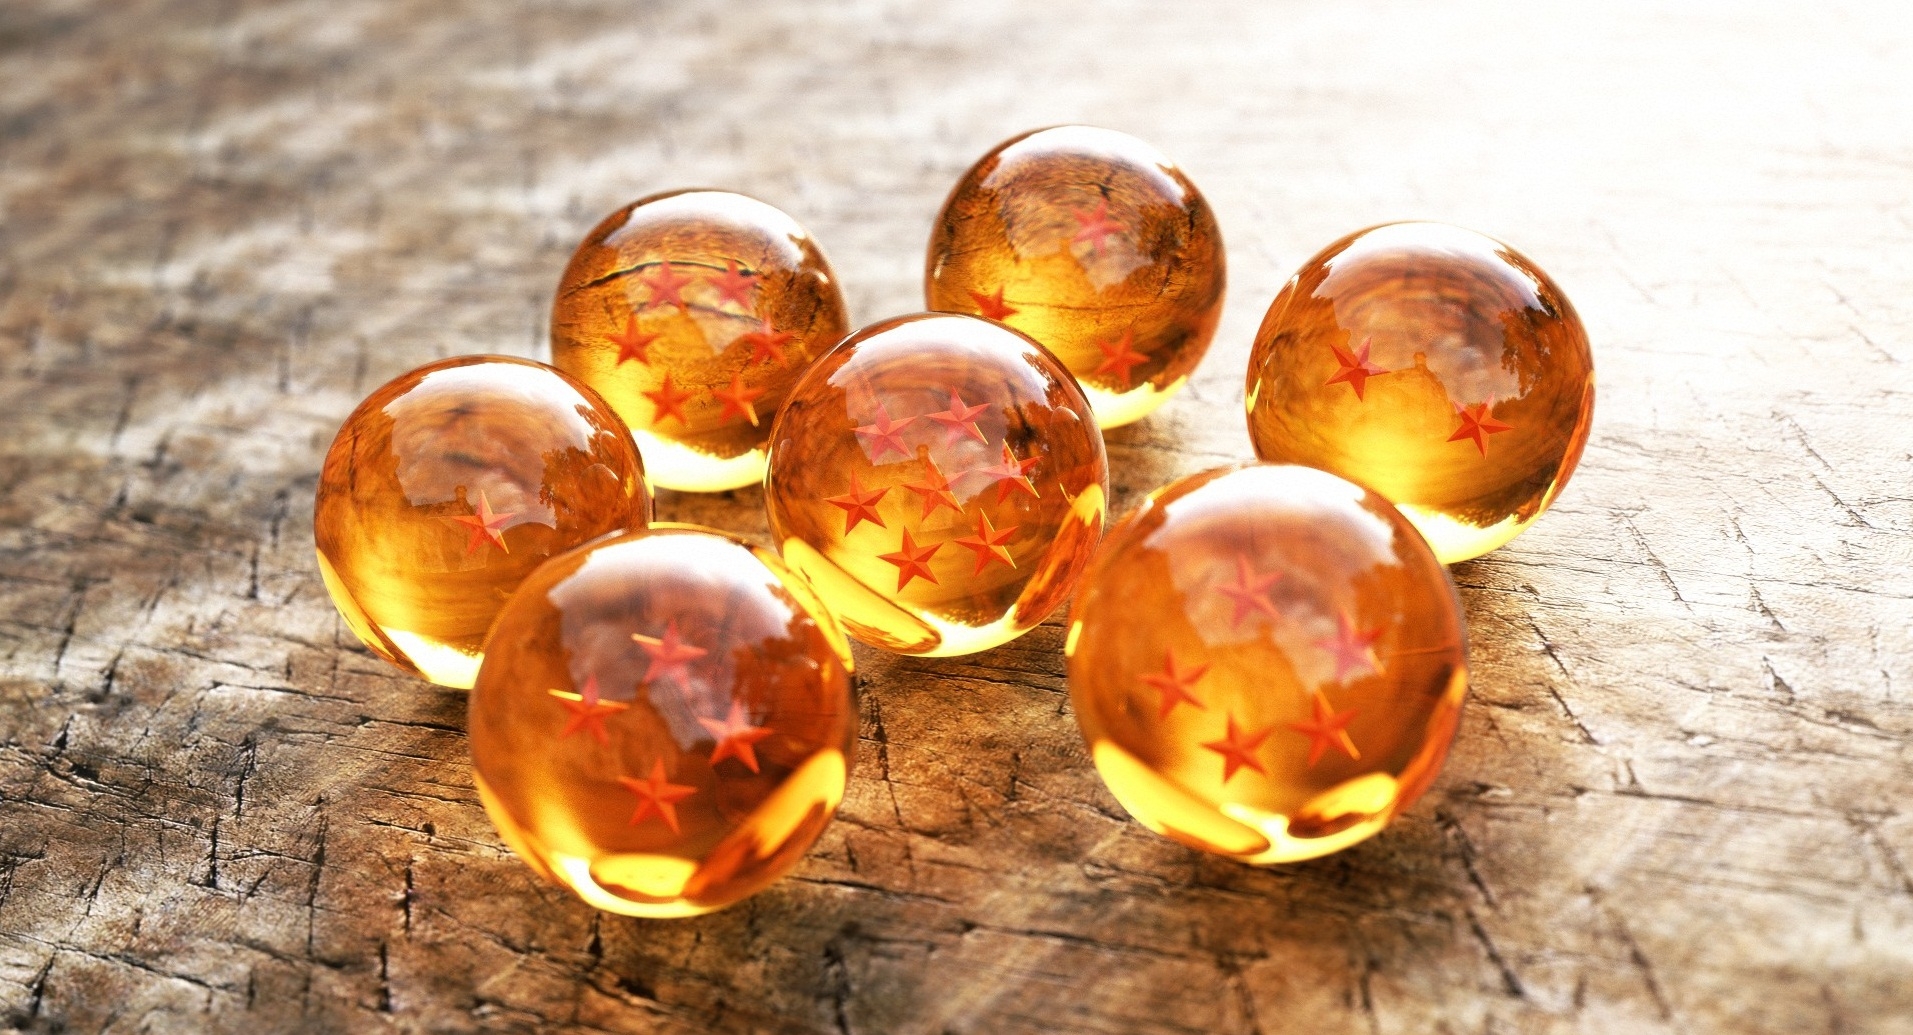 HD wallpaper reflection, 3d, surface, miscellanea, miscellaneous, structure, glass, ball, table, graphics, star, 3d graphics